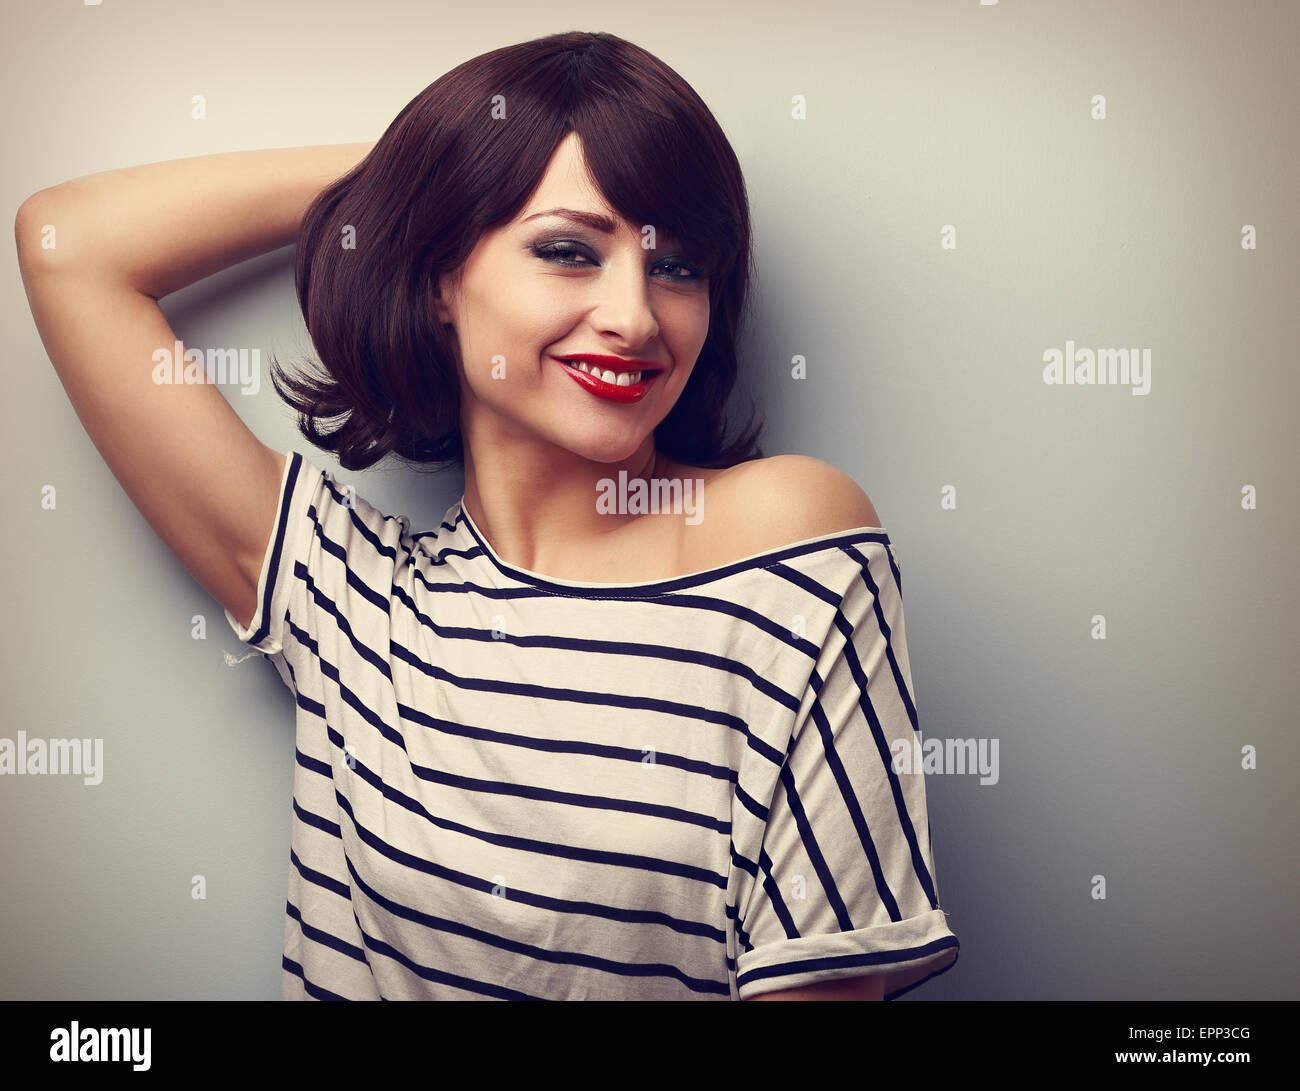 Smiling happy young woman in casual dress relaxing on wall background. Vintage closeup portrait Stock Photo